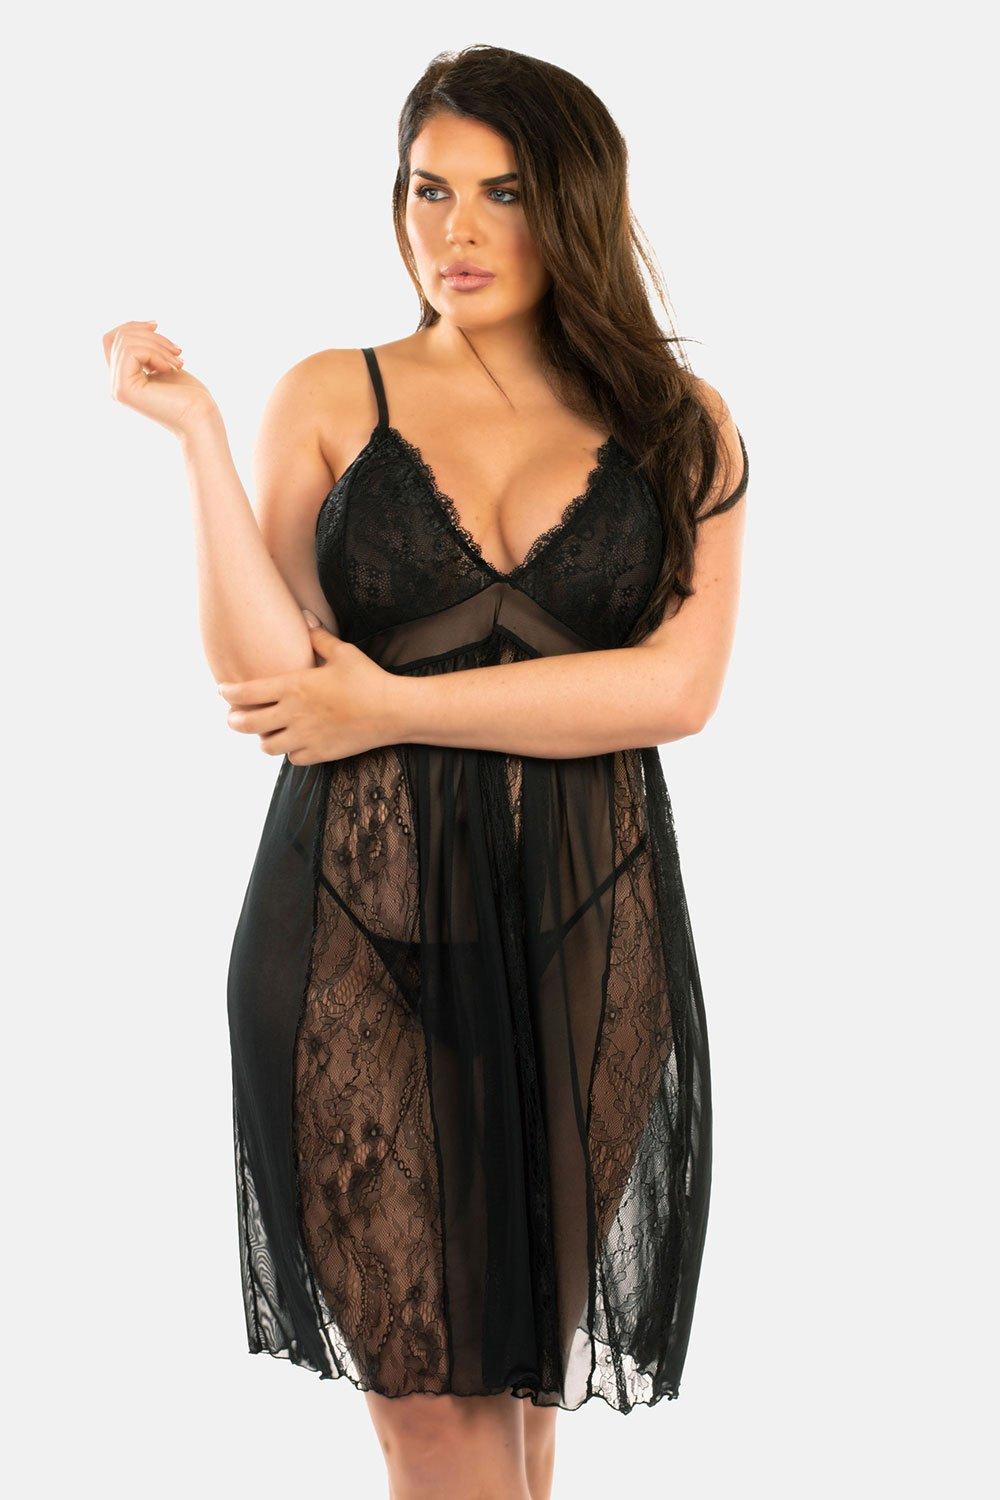 Isie Lace & Mesh Plus Size Nightwear with Matching Thong